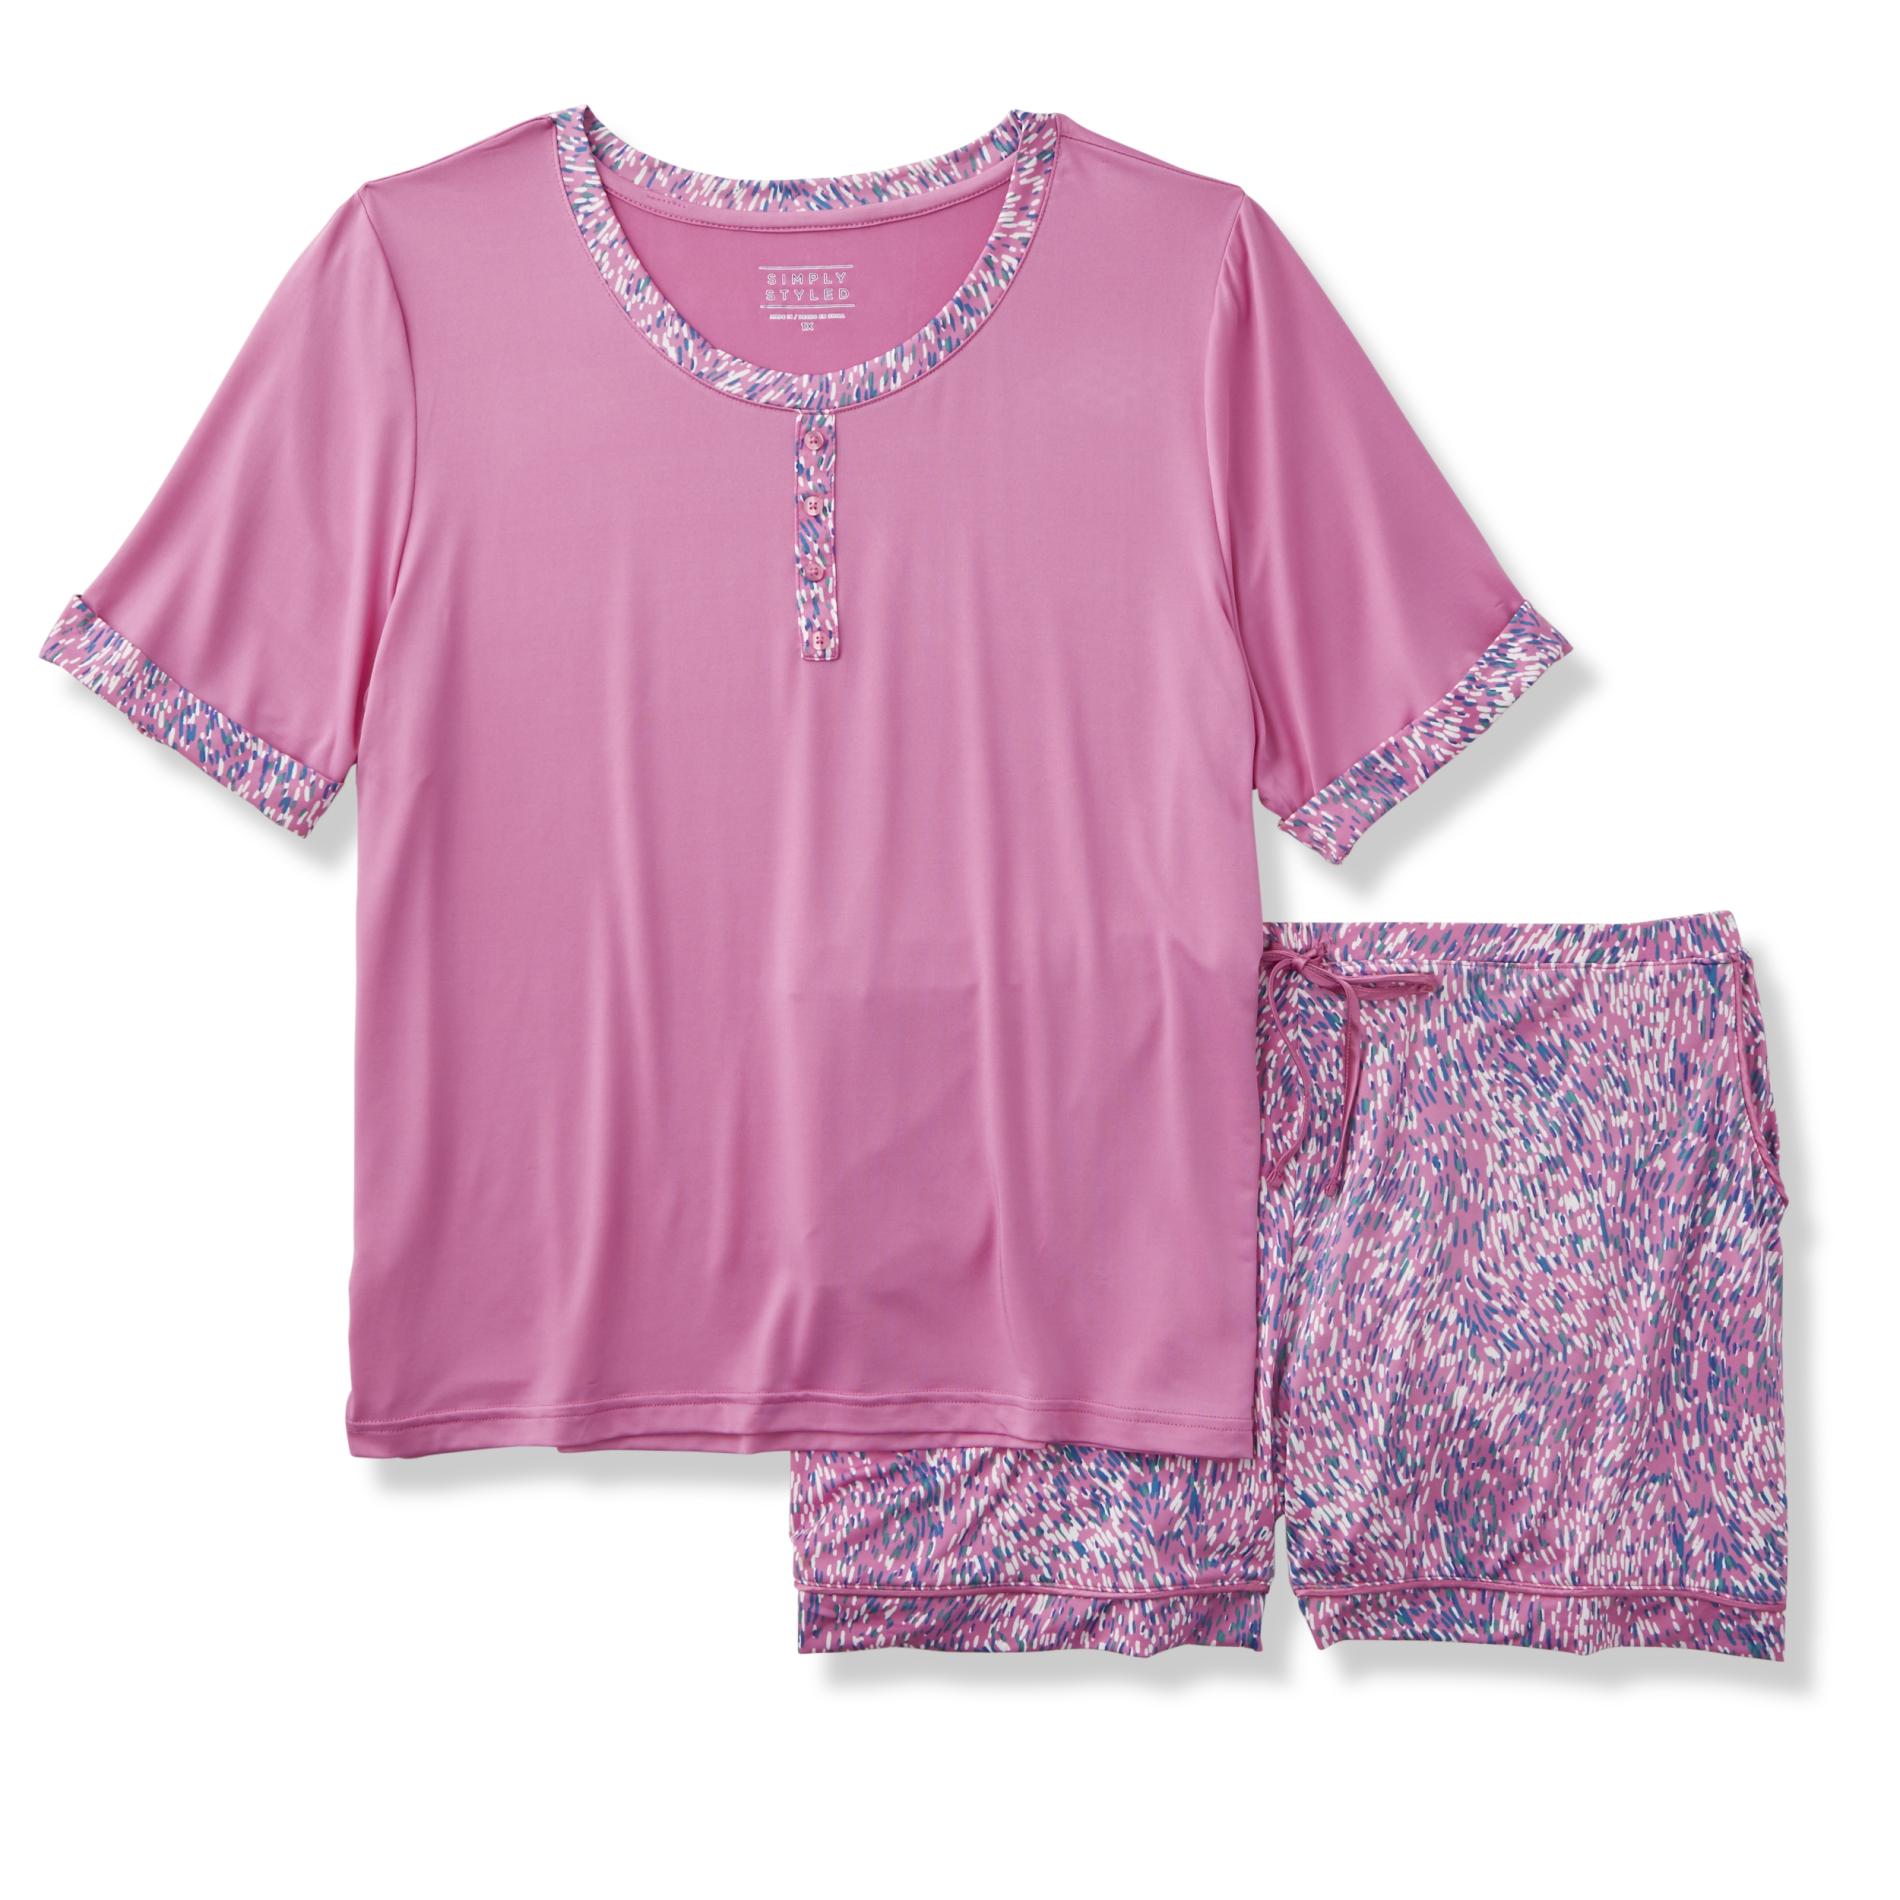 Simply Styled Women's Plus Pajama Shirt & Shorts - Abstract